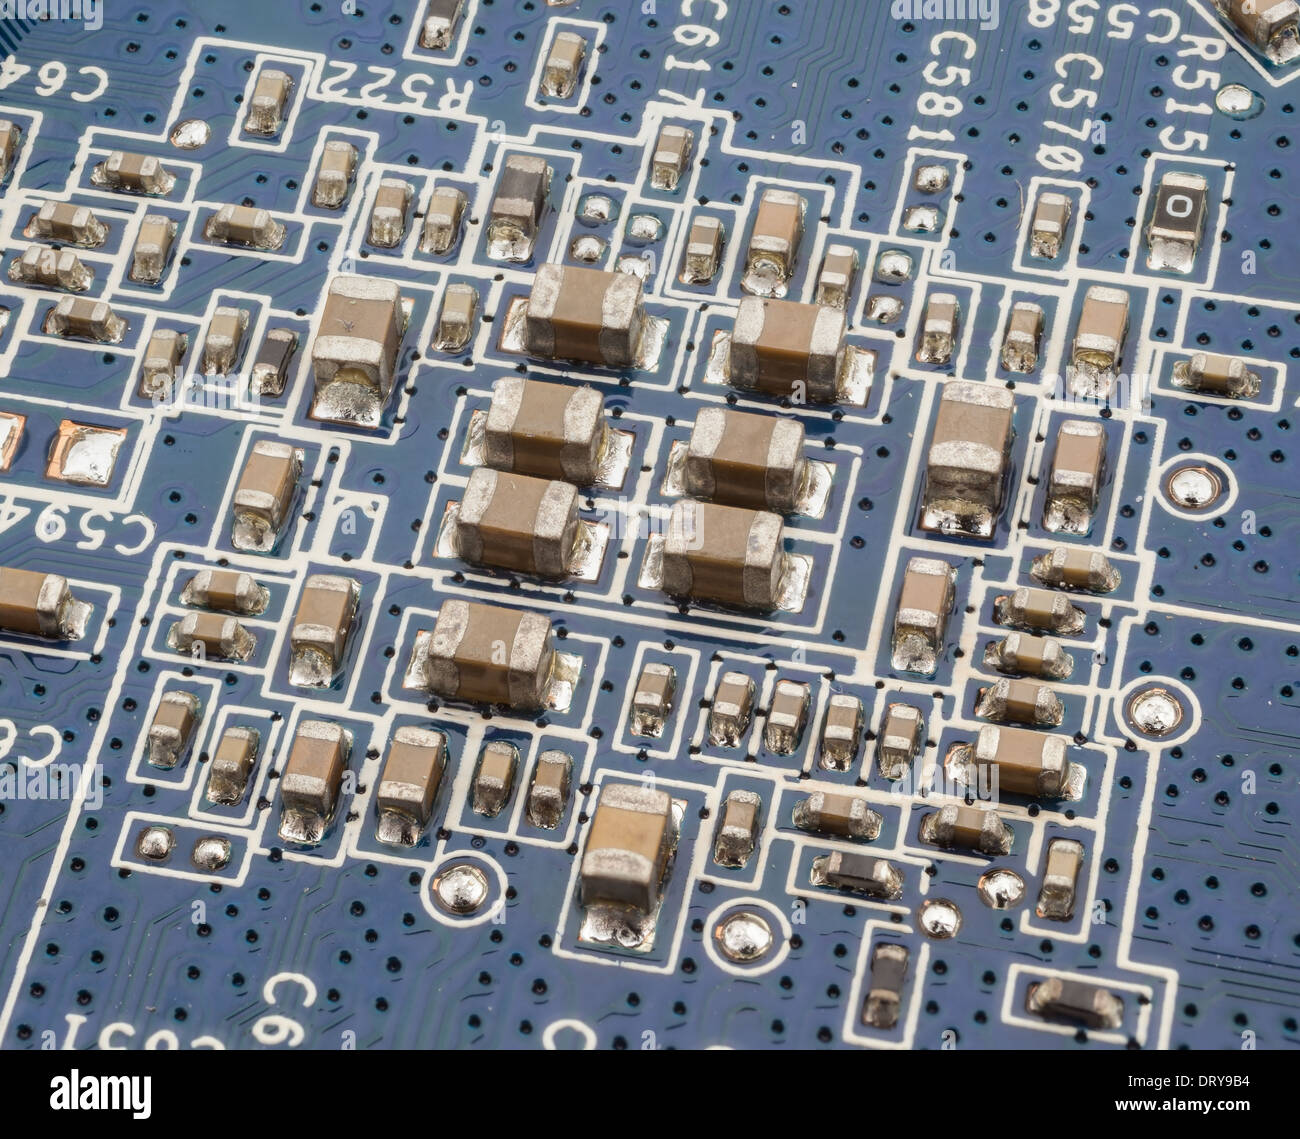 Electronic components on the circuit board Stock Photo